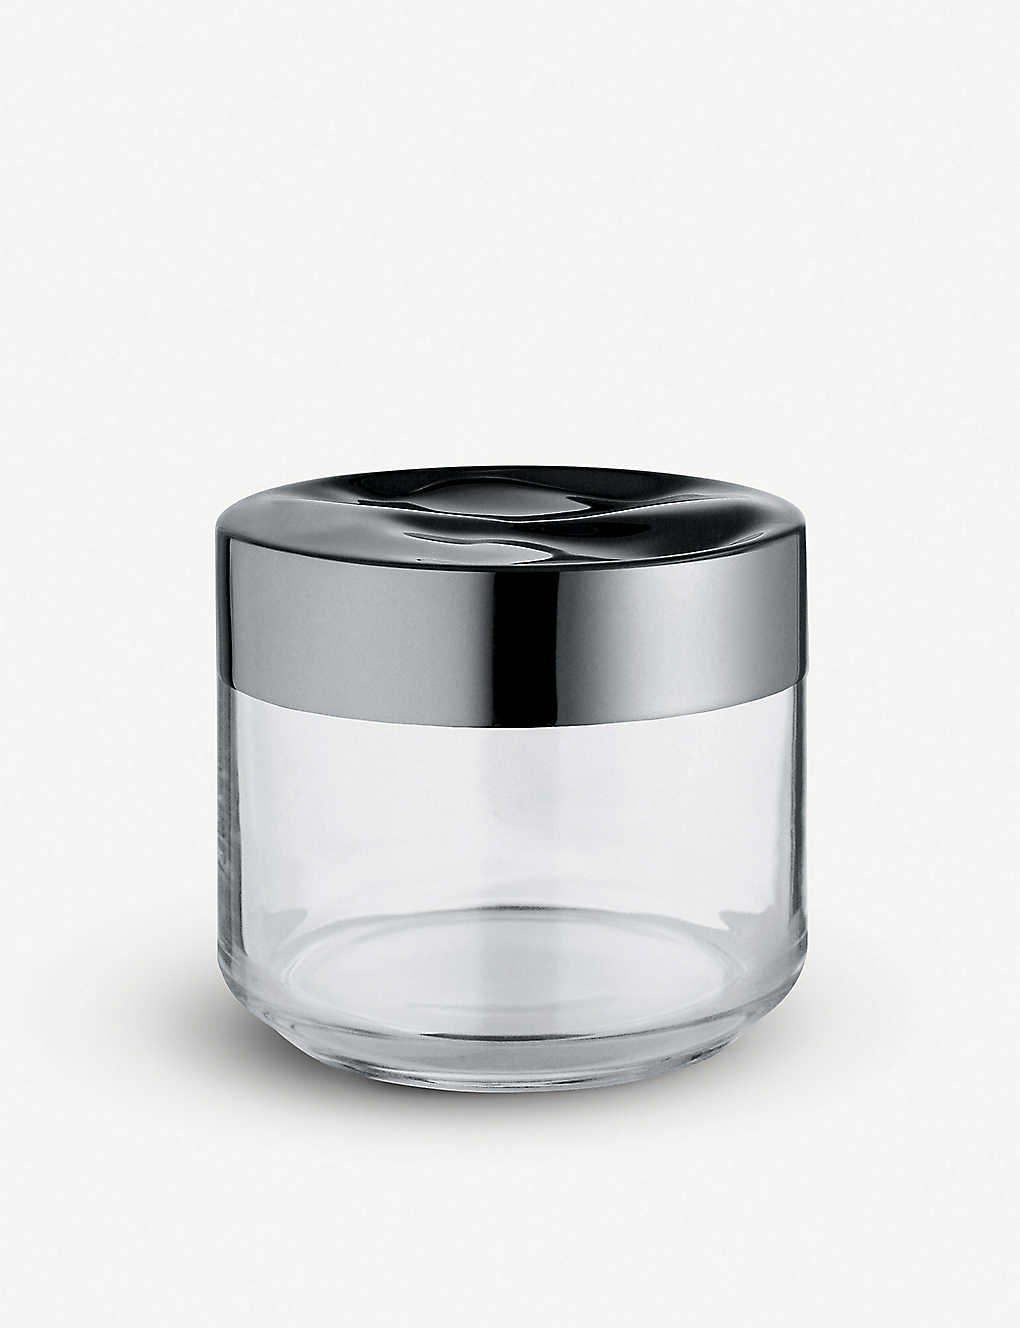 Alessi Julieta Glass And Stainless Steel Jar 9.3cm In Nocolor